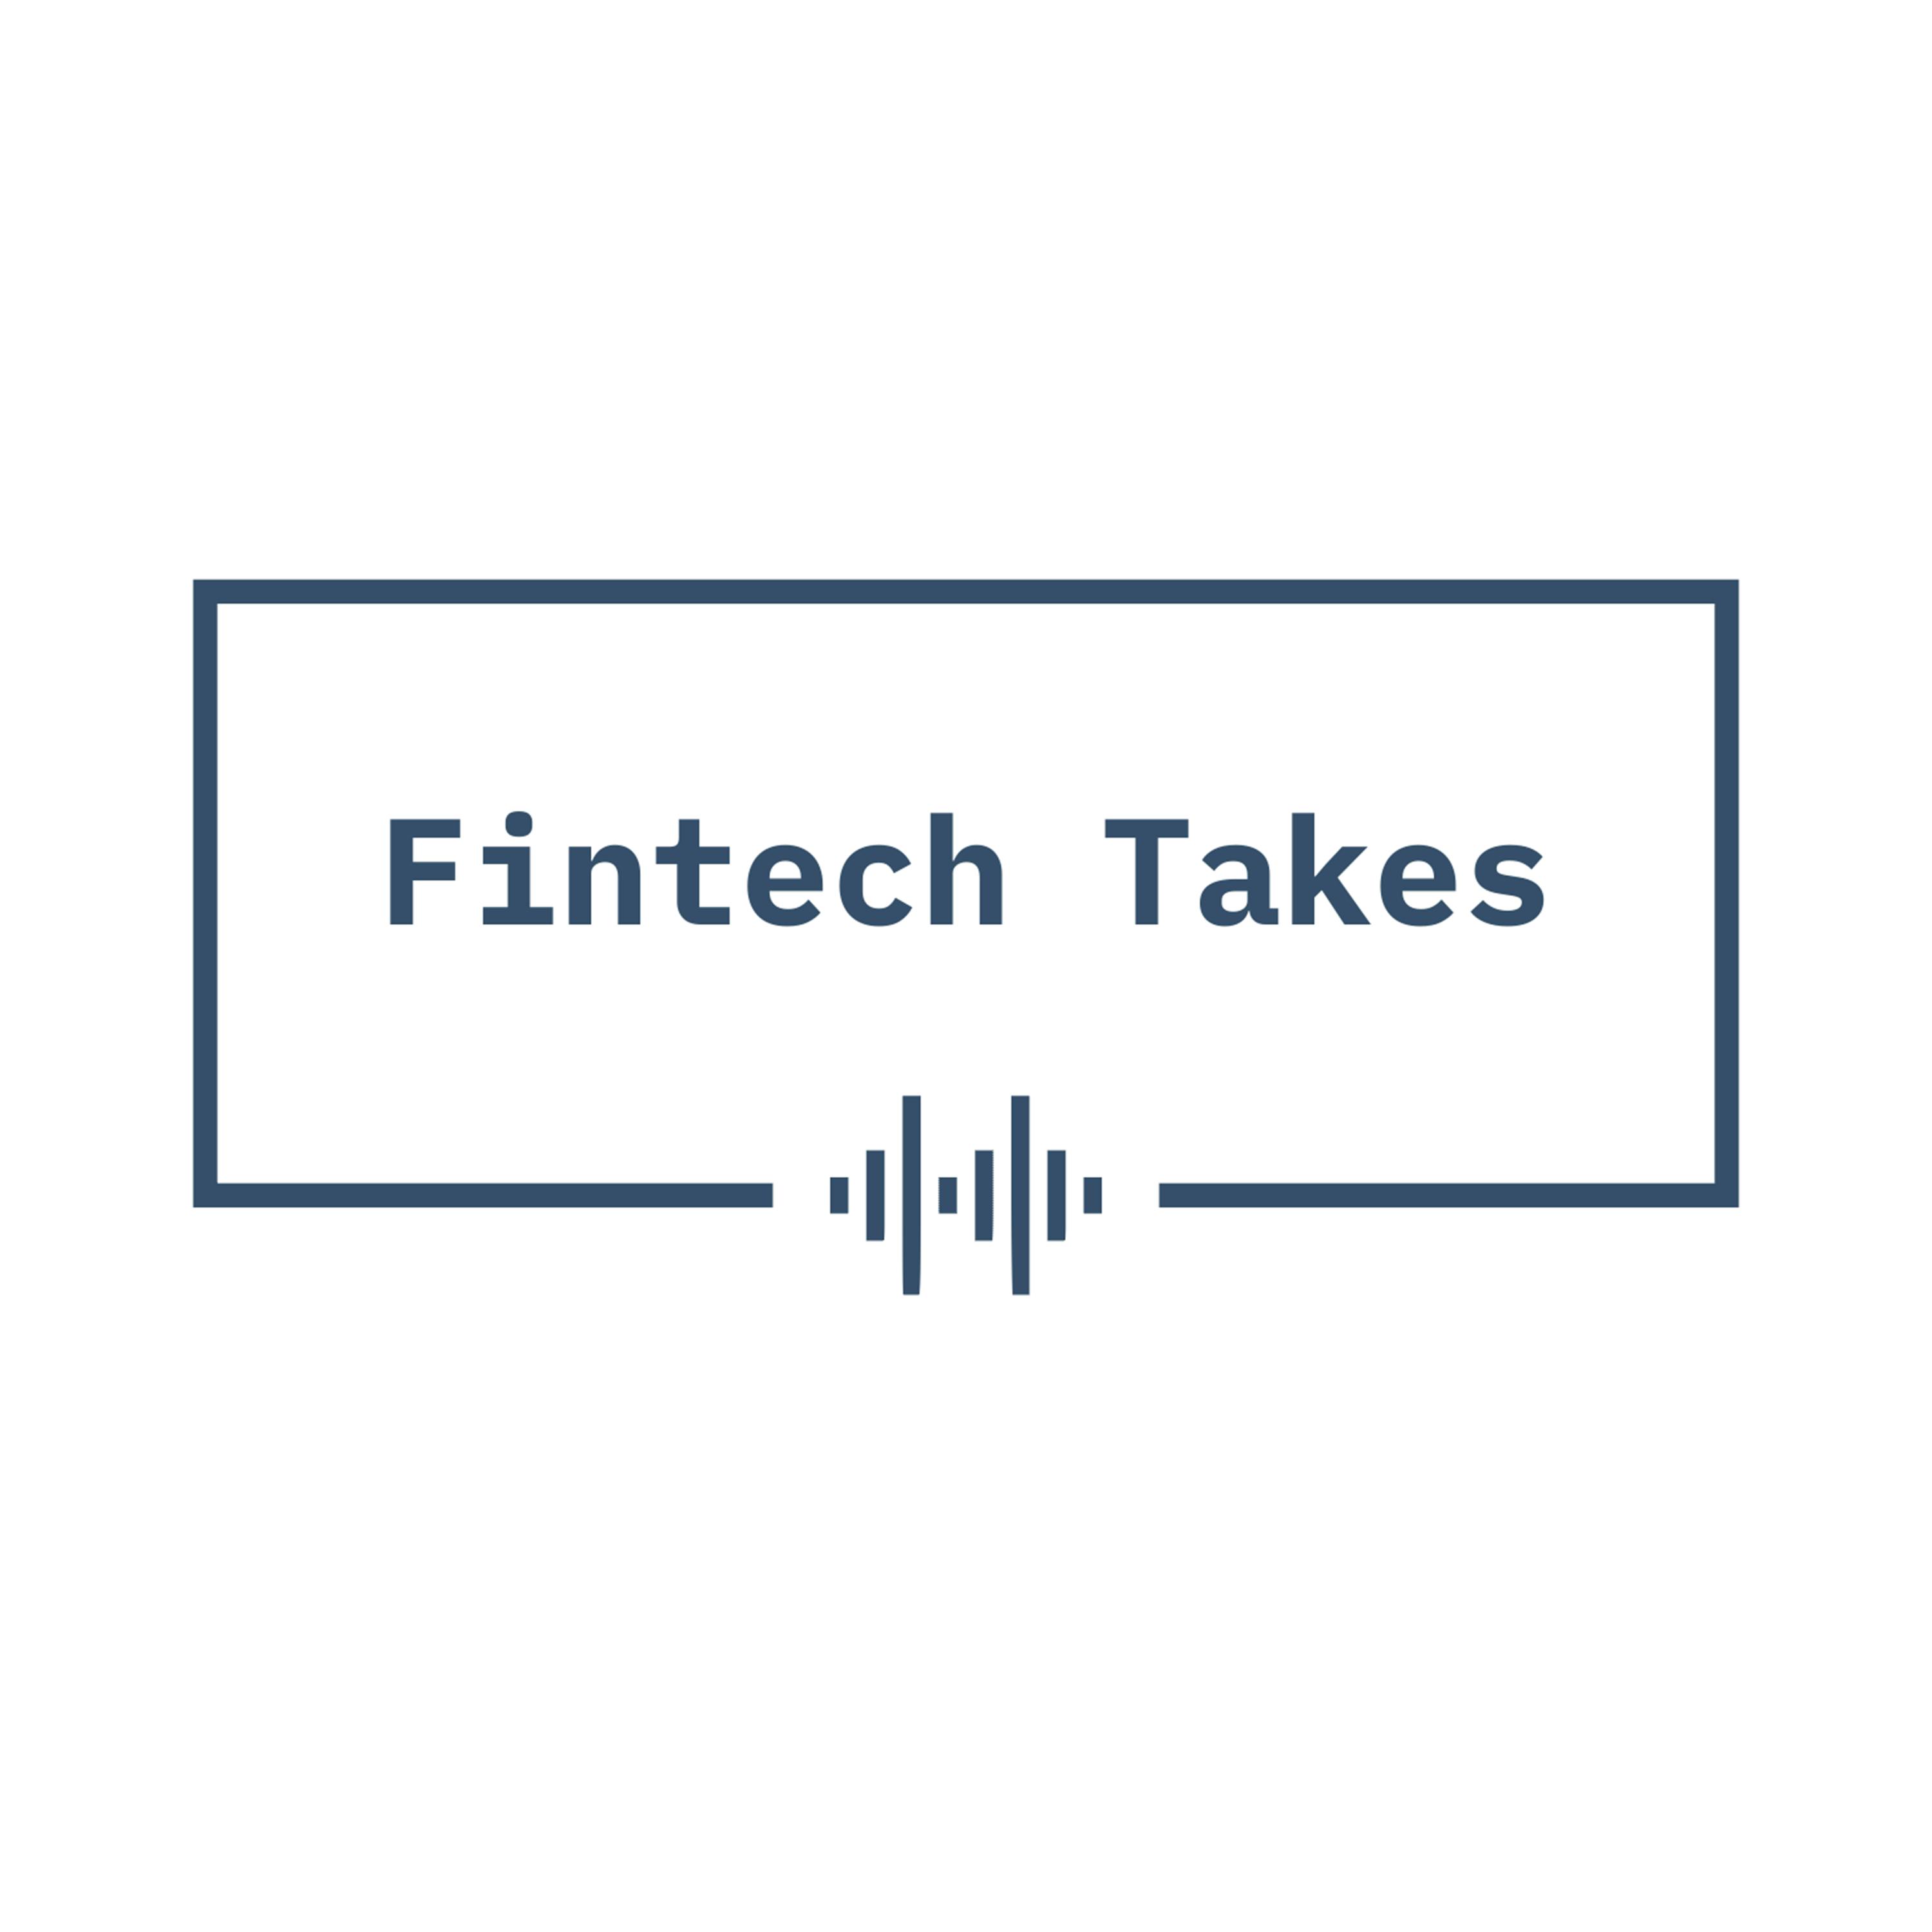 S4 Ep2: BNC: MOVEit’s Security Breach, Bank M&A, and the Hidden Risks of Faster Money Movement